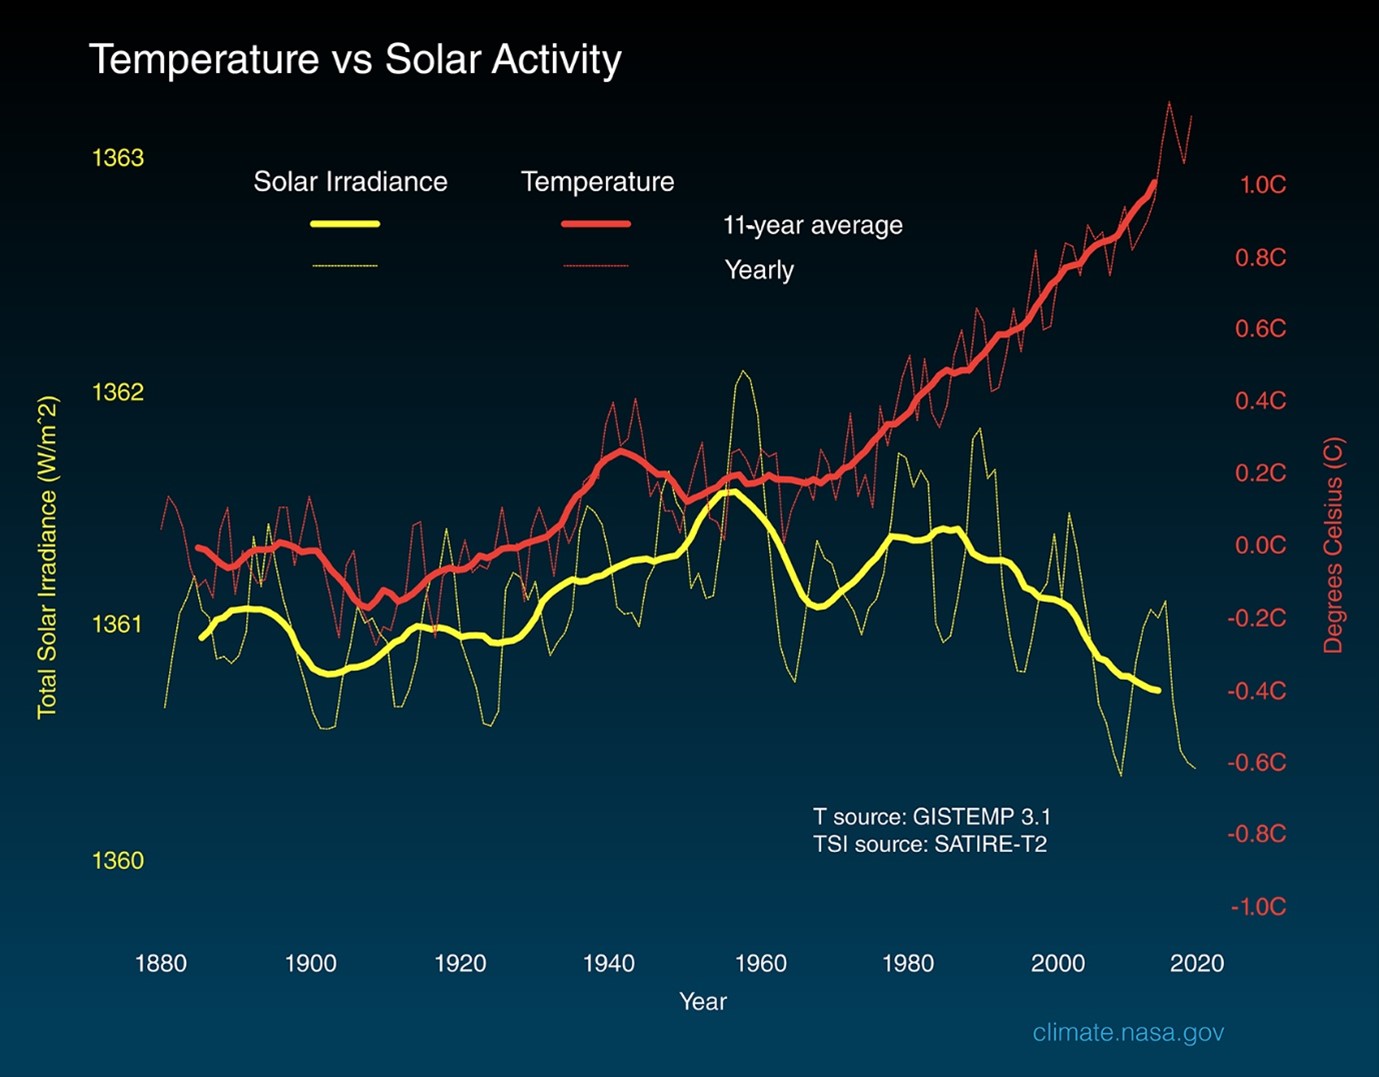 Graph showing temperature overlaid on solar irradiance, showing a significant and growing divergence since around 1960